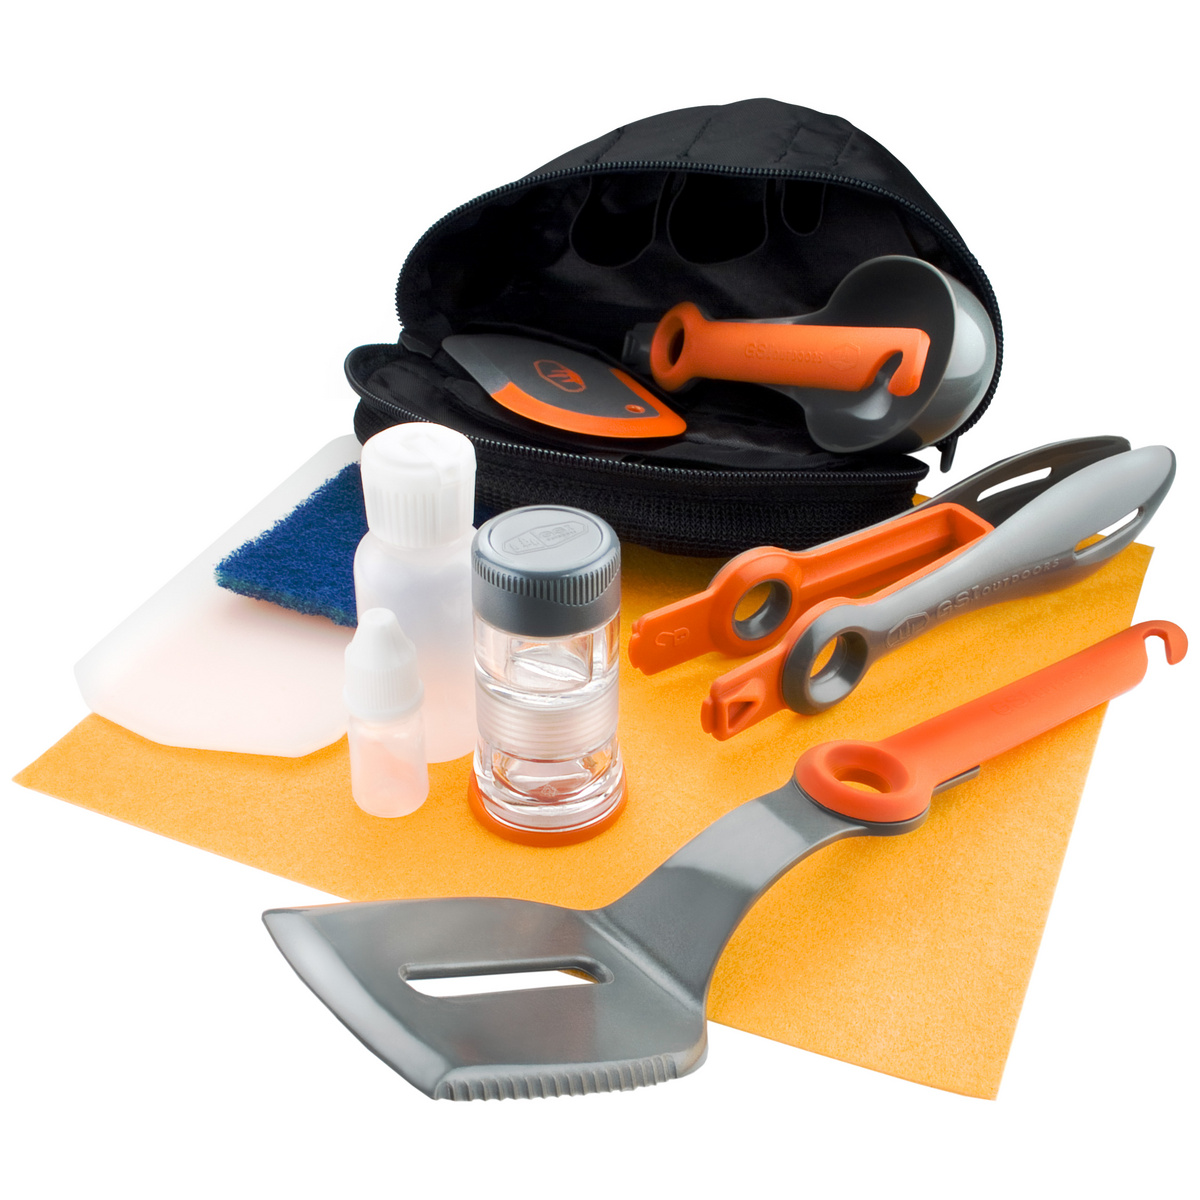 Image of GSI Crossover Kitchen Kit